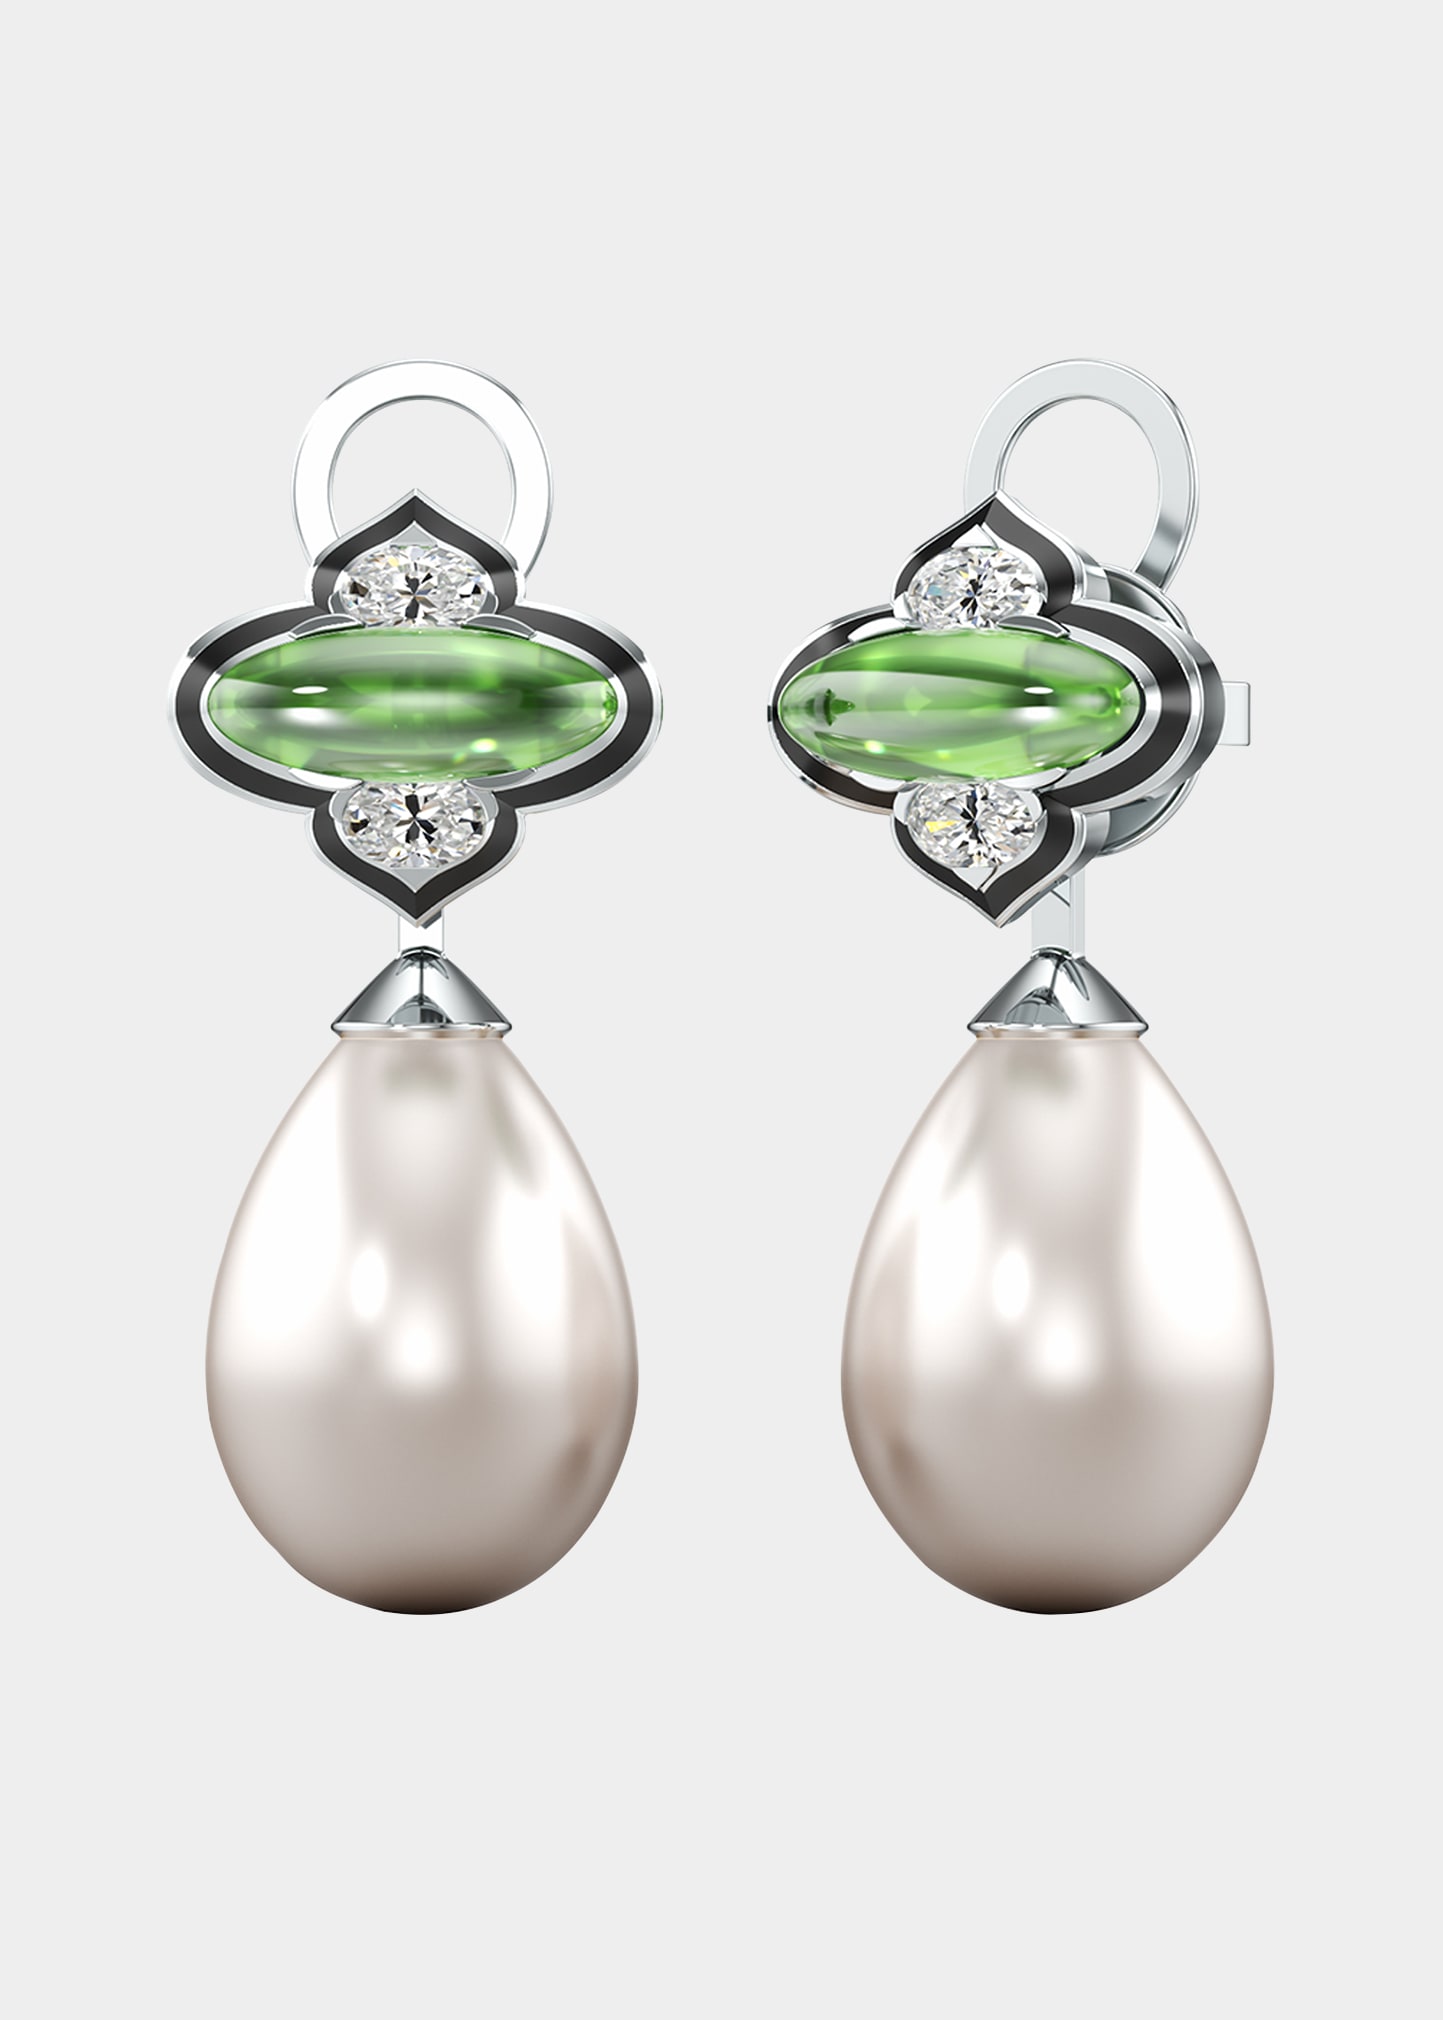 White Gold Diamond and Green Tourmaline Earrings with Black Ceramic and Pearls